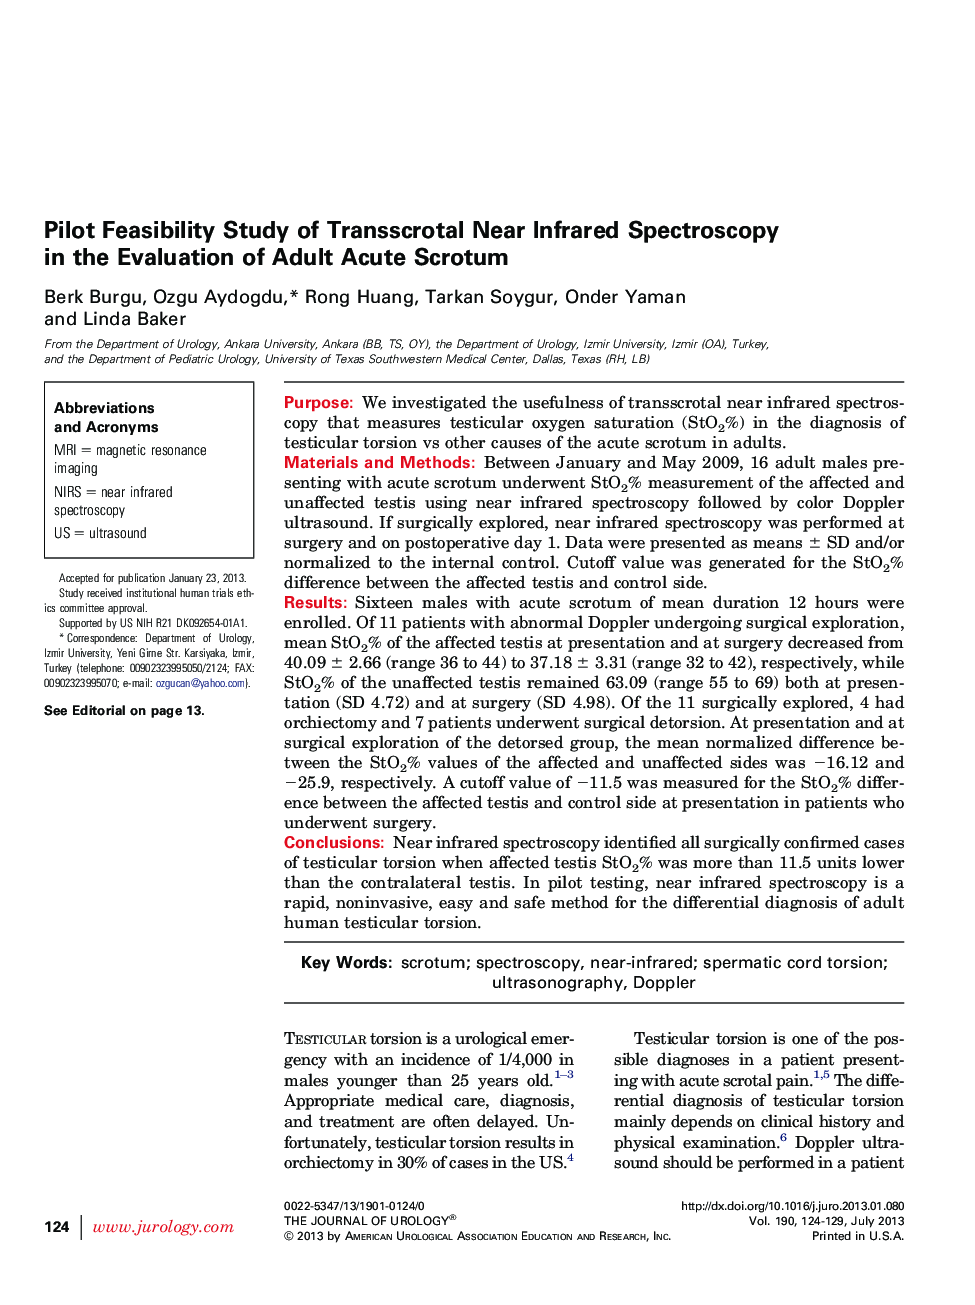 Pilot Feasibility Study of Transscrotal Near Infrared Spectroscopy in the Evaluation of Adult Acute Scrotum 